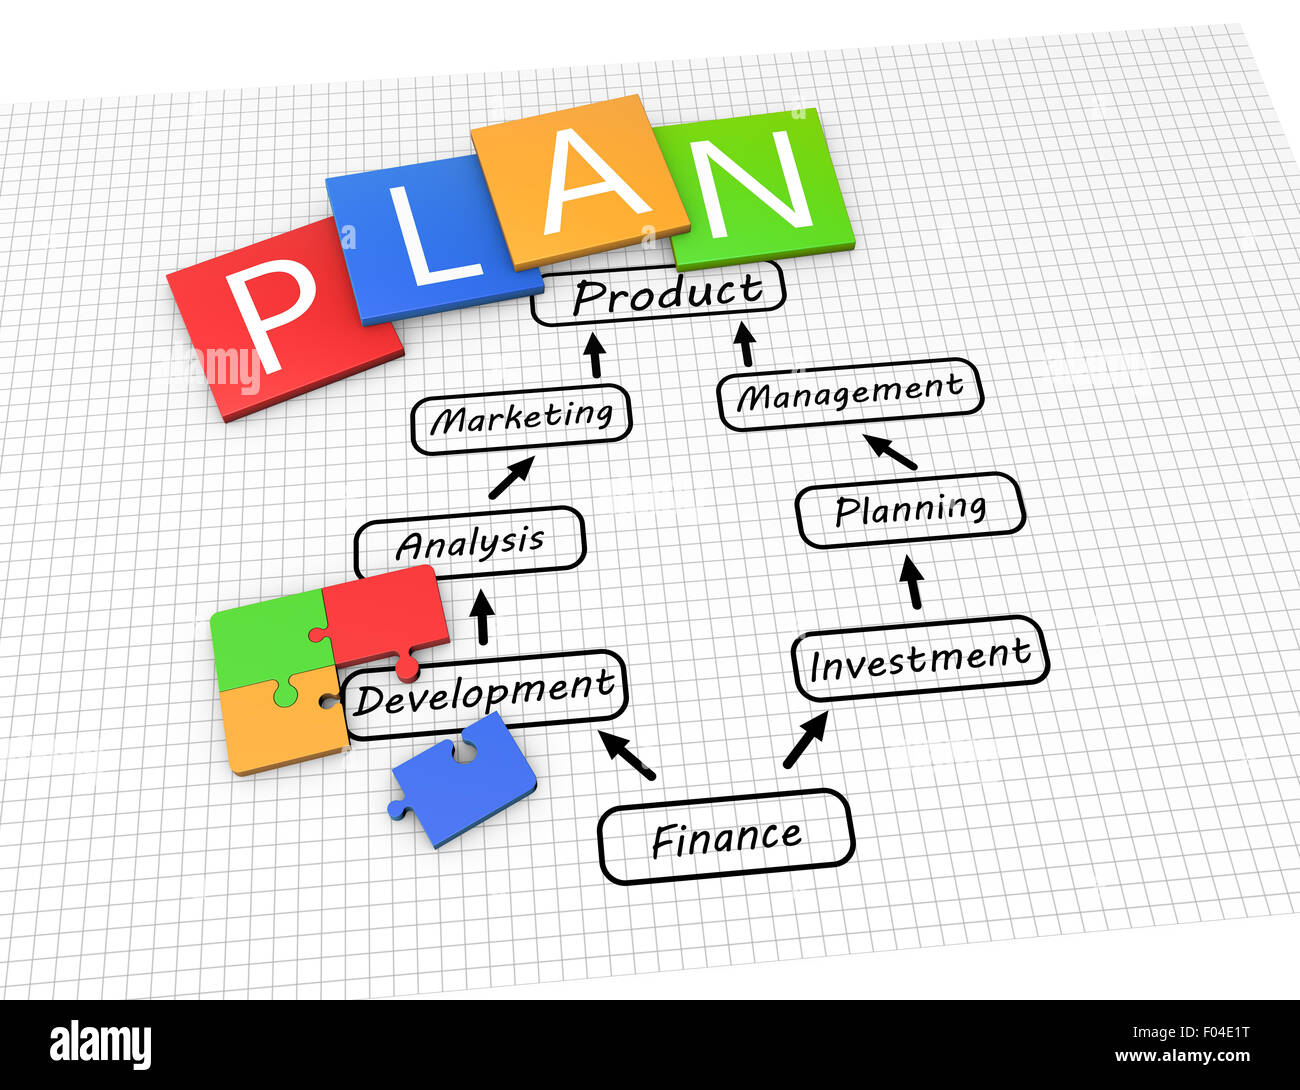 Draw The Flow Chart Of Planning Process